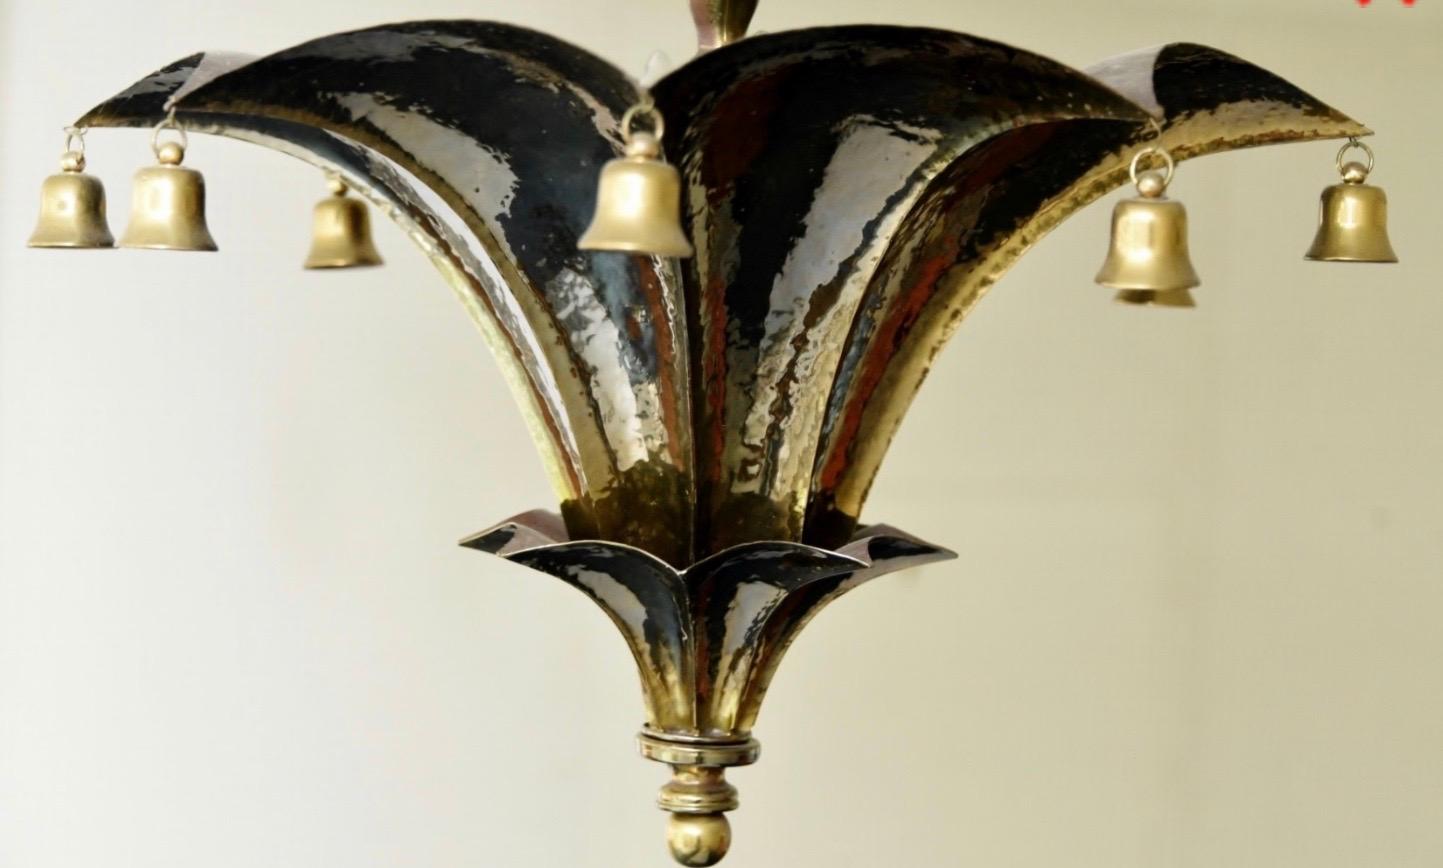 A wonderful pair of pagoda brass 4 candelabrum light fixtures with bells, semi flushmount chandeliers
In the manor of Jansen.